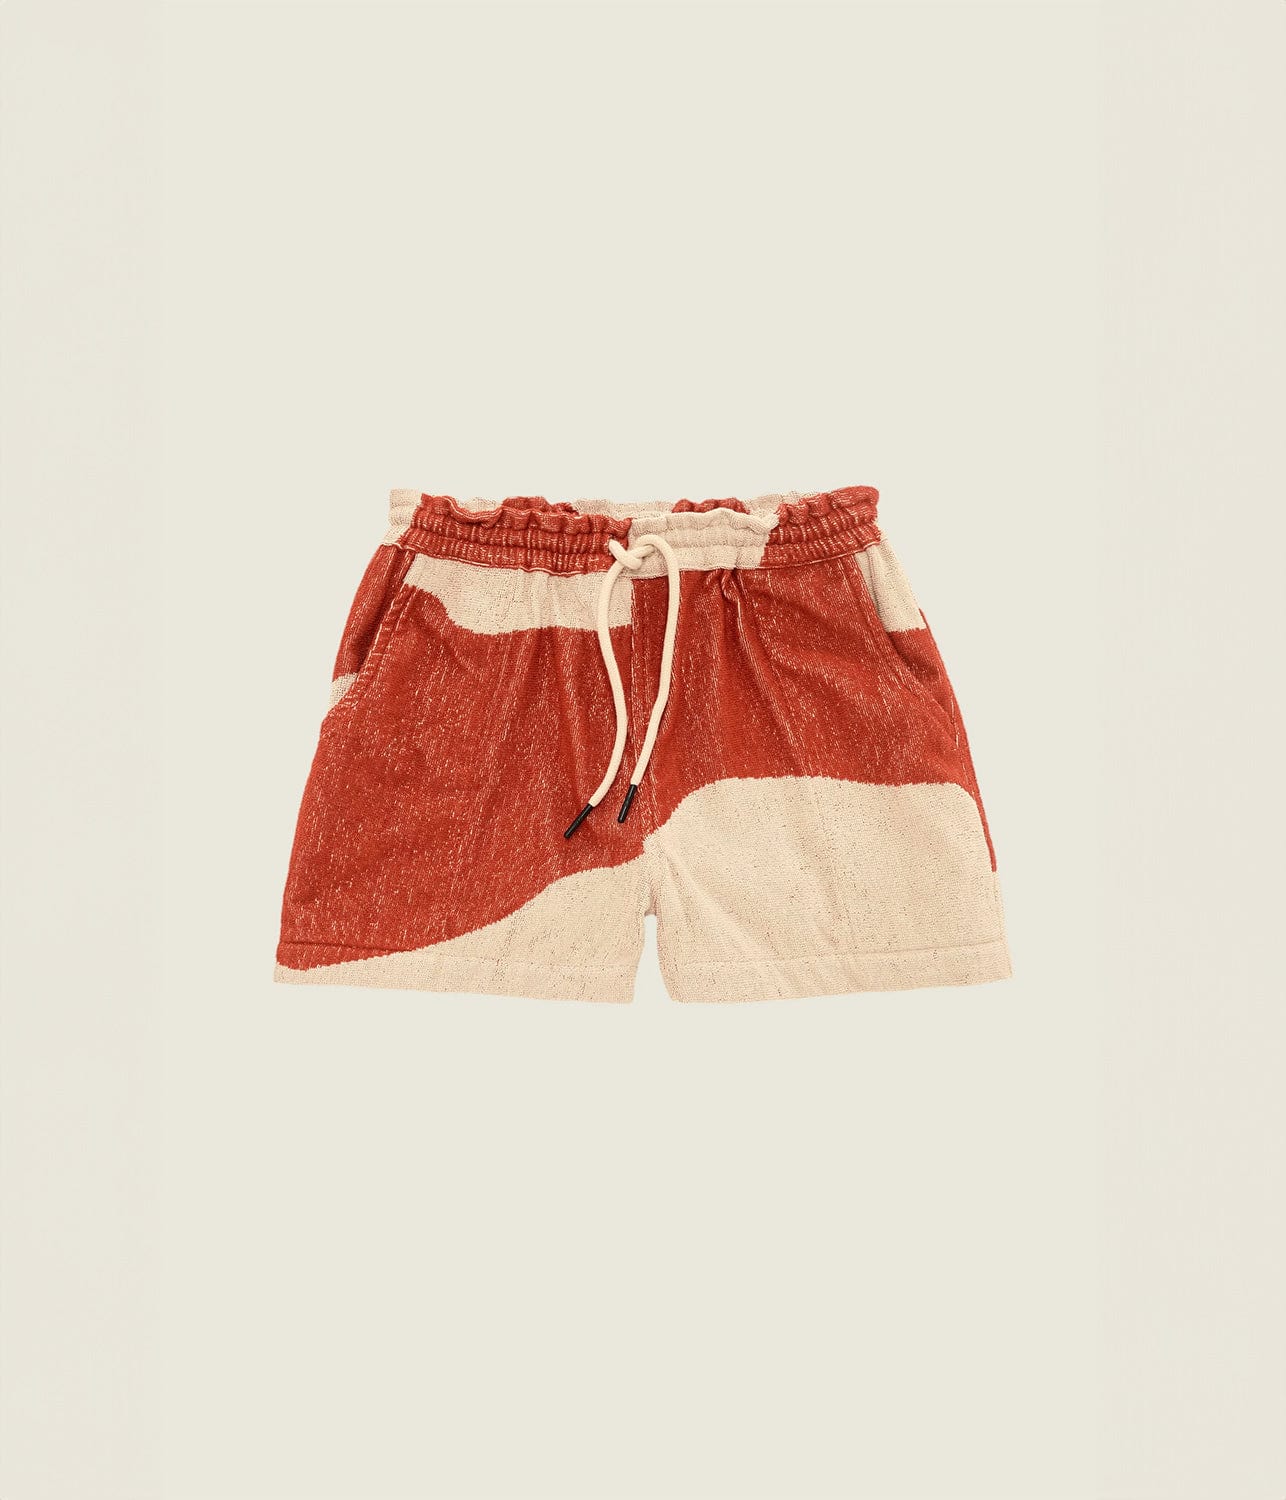 DRIZZLE TERRY SHORTS- AMBER DUNE | OAS COMPANY |  OAS COMPANY DRIZZLE TERRY SHORTS- AMBER DUNE